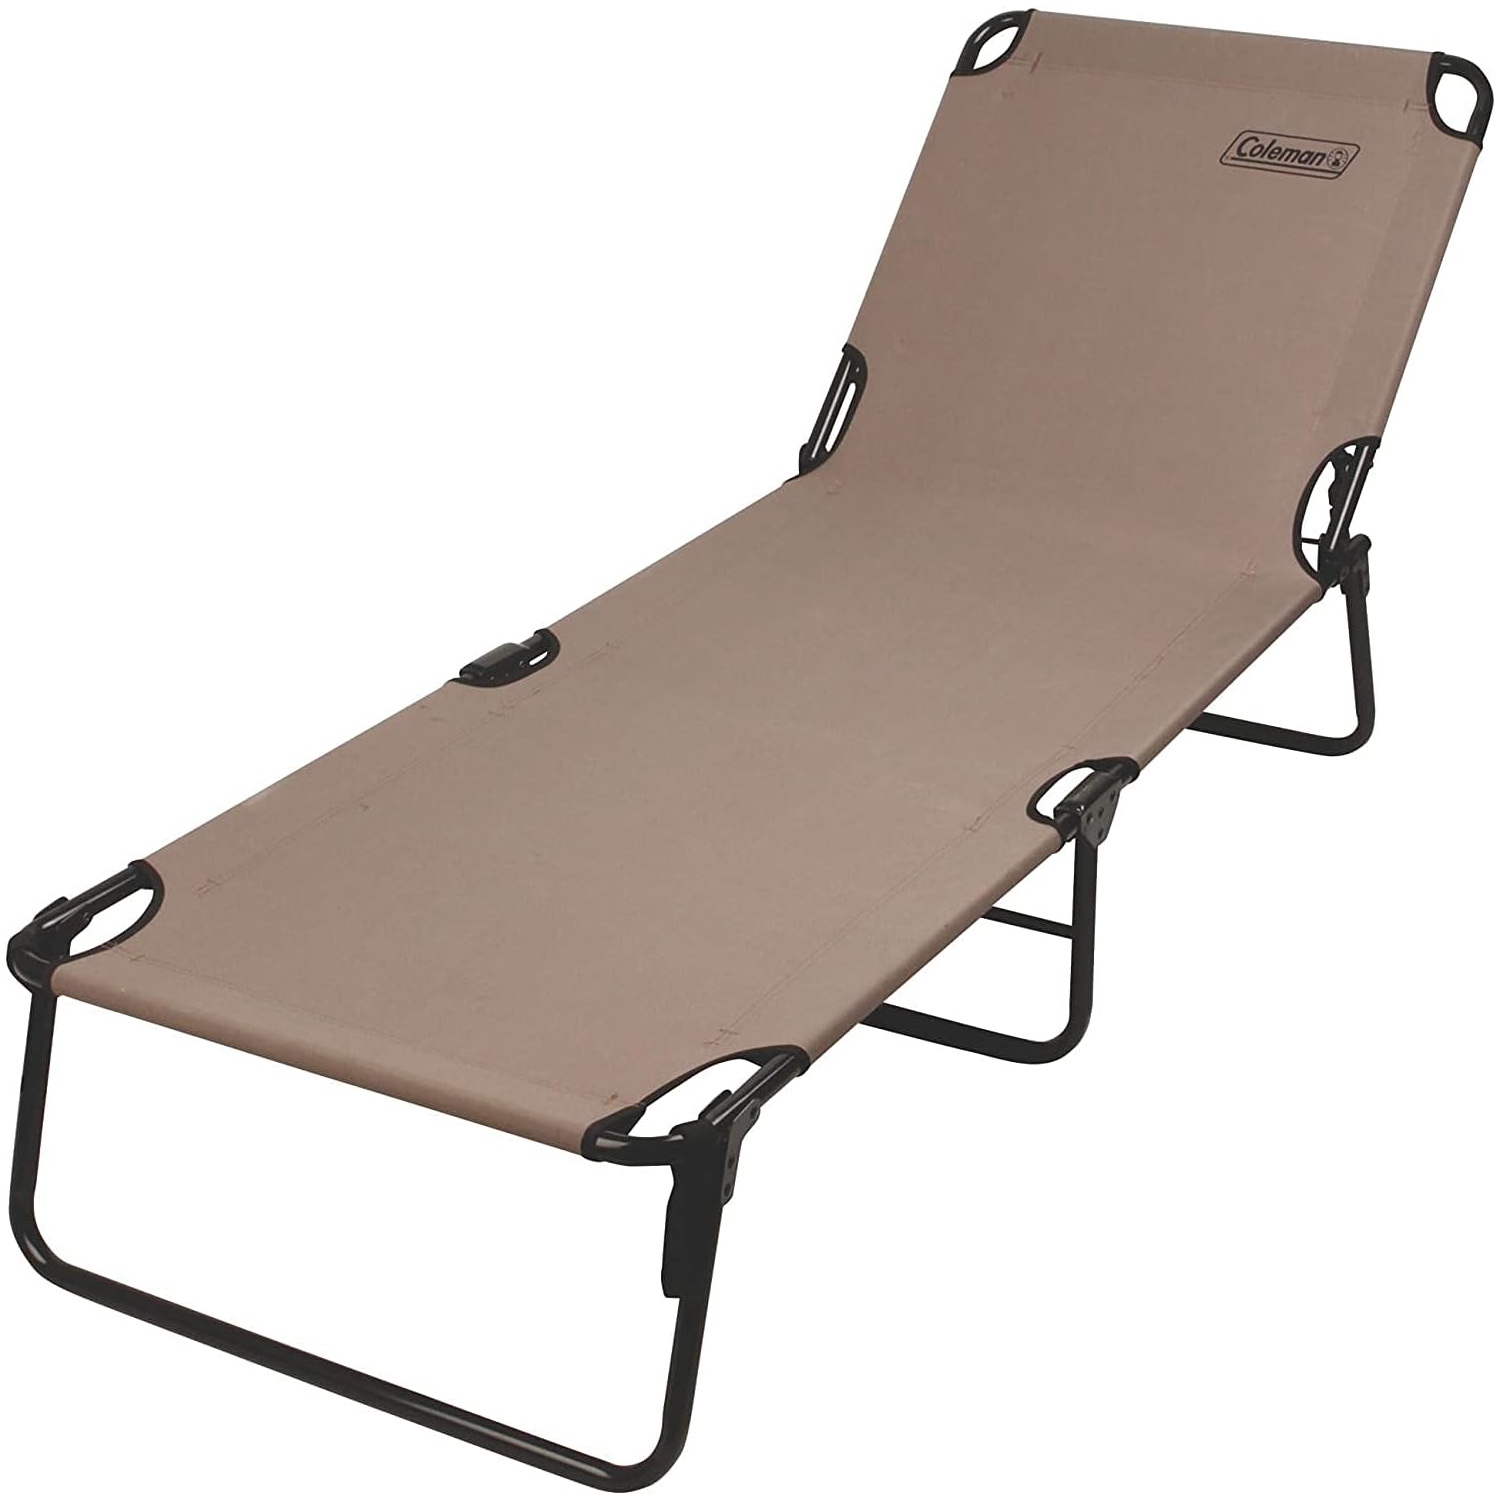 The Best Cheap Outdoor Patio Furniture Option: Coleman Converta Folding Cot